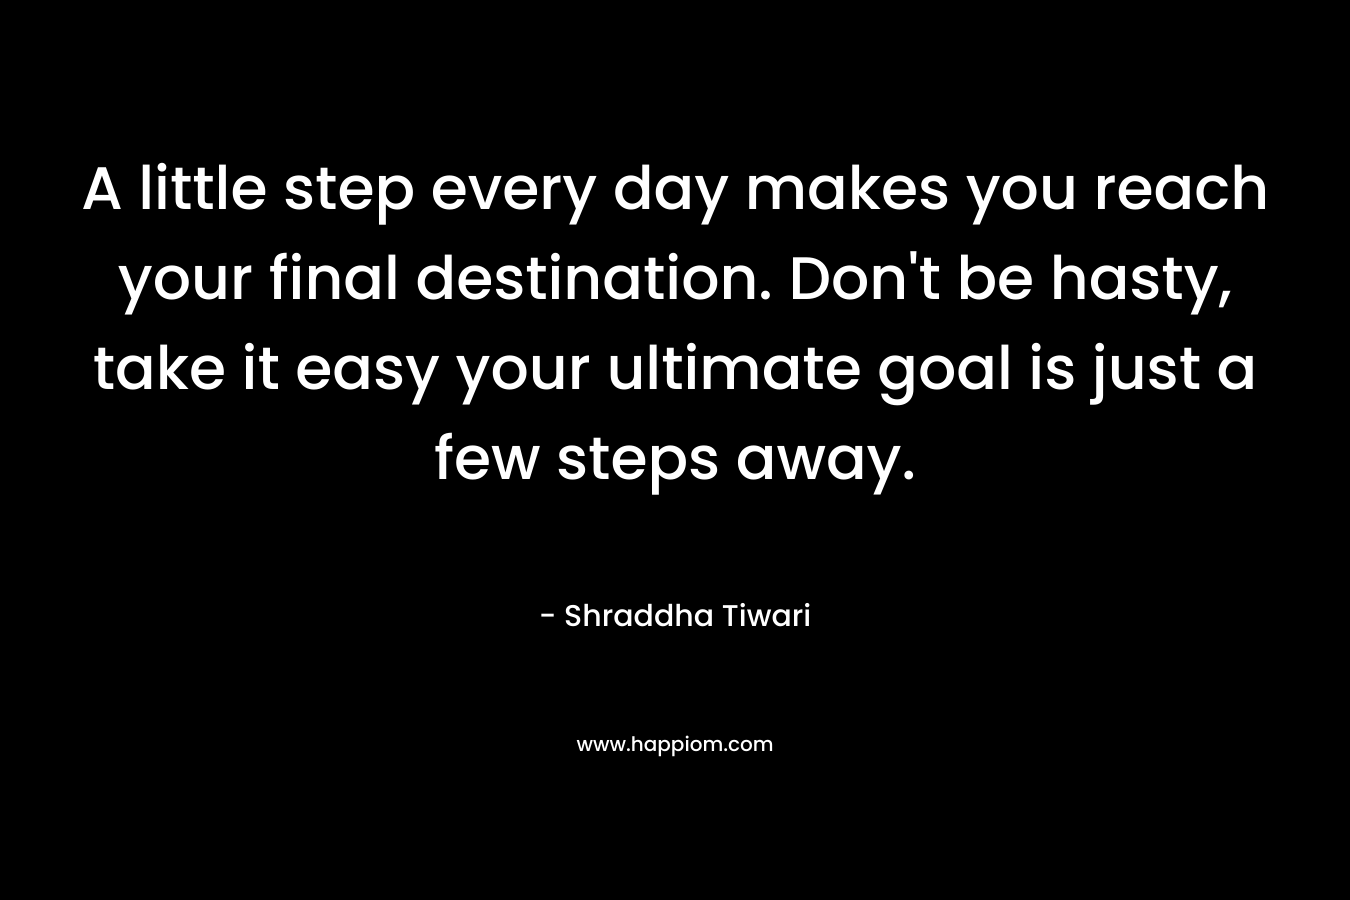 A little step every day makes you reach your final destination. Don’t be hasty, take it easy your ultimate goal is just a few steps away. – Shraddha Tiwari